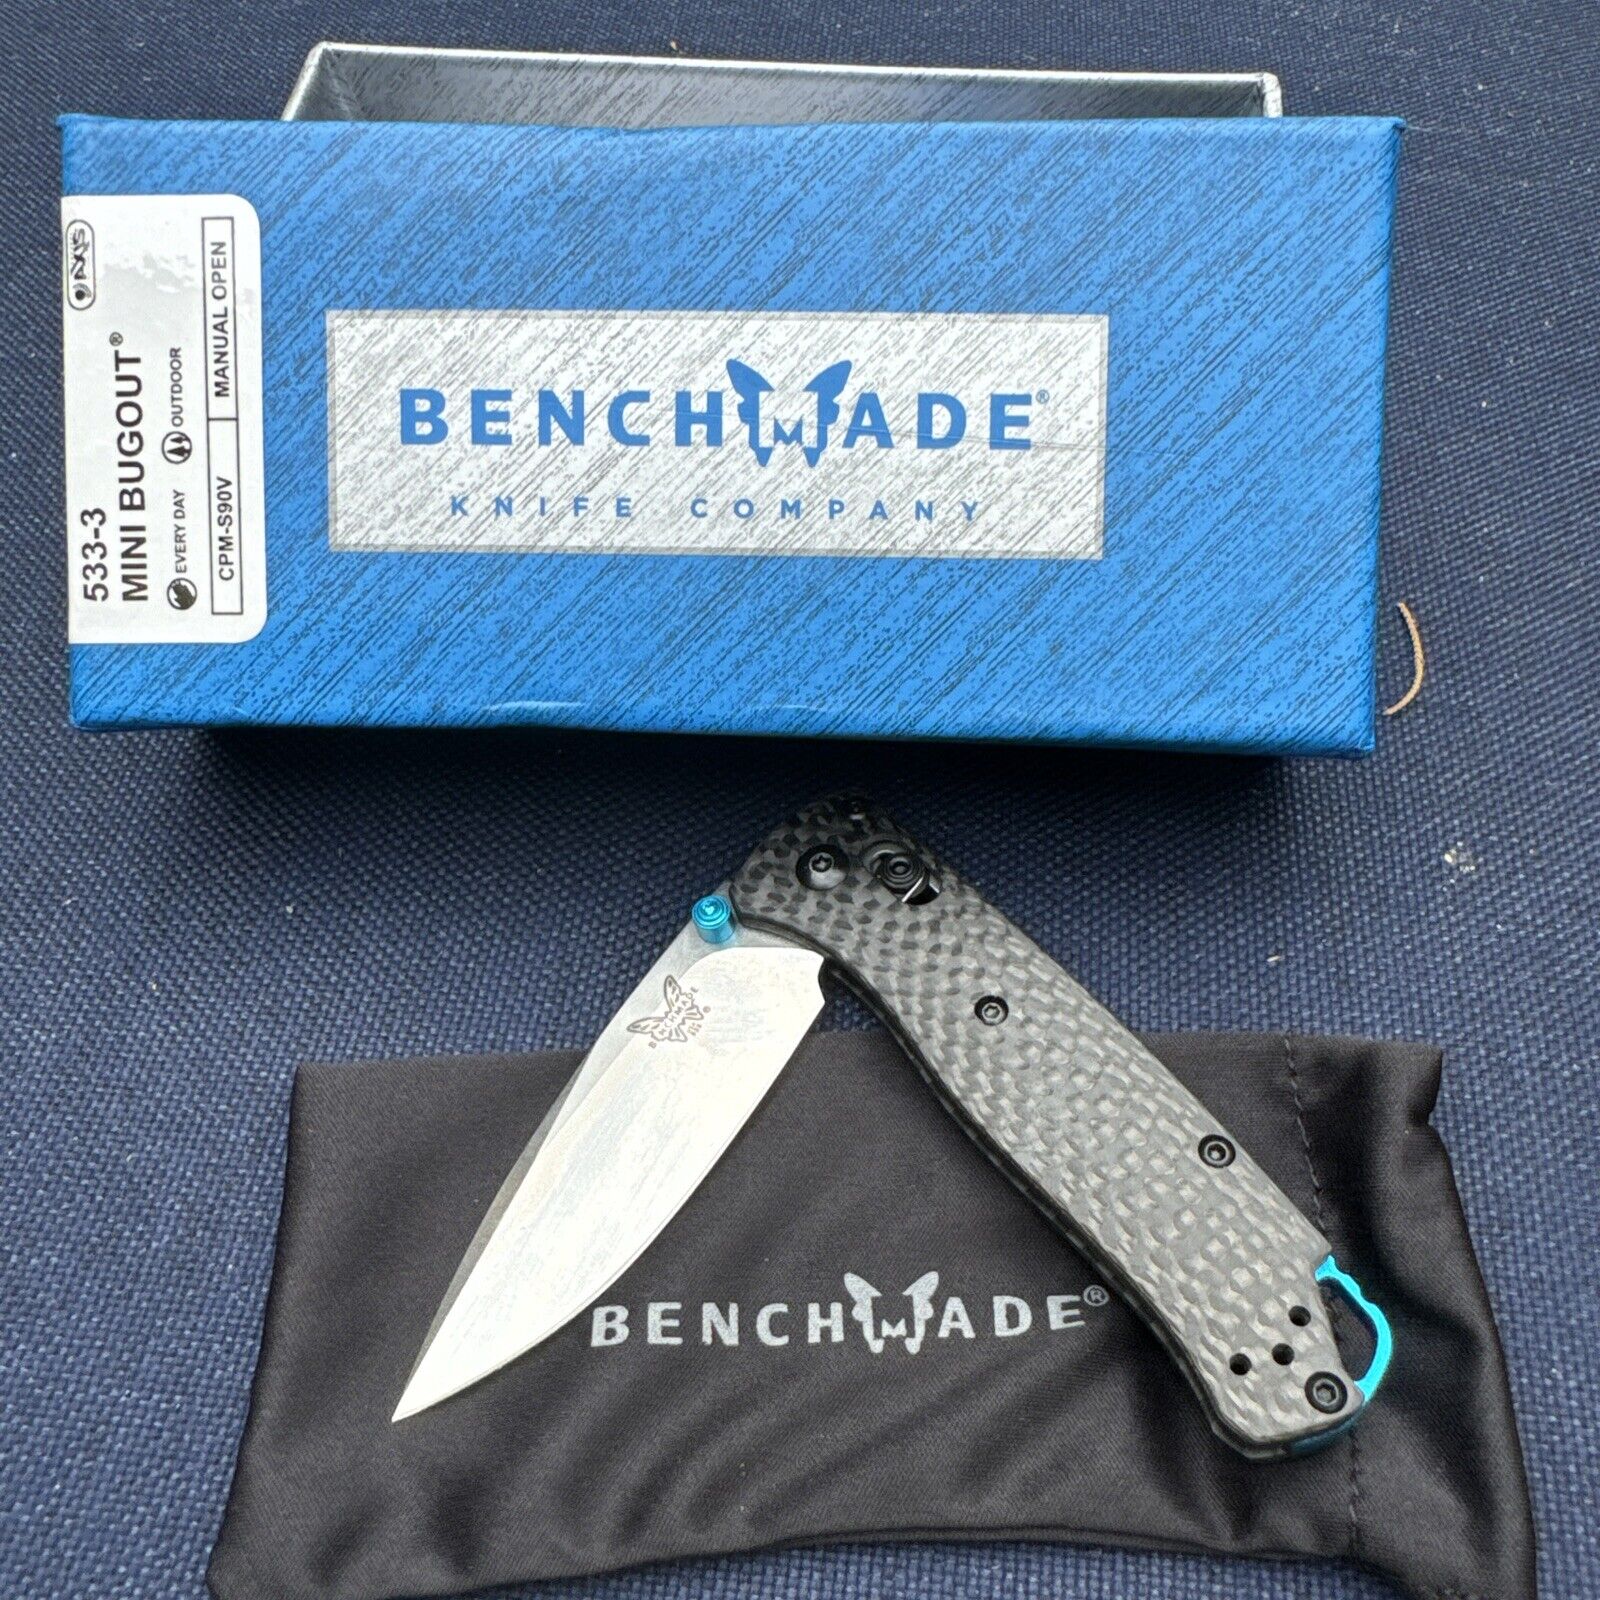 BENCHMADE 533-3 MINI BUGOUT CPM-S90V Carbon Fiber NEW IN BOX - MADE IN THE USA**